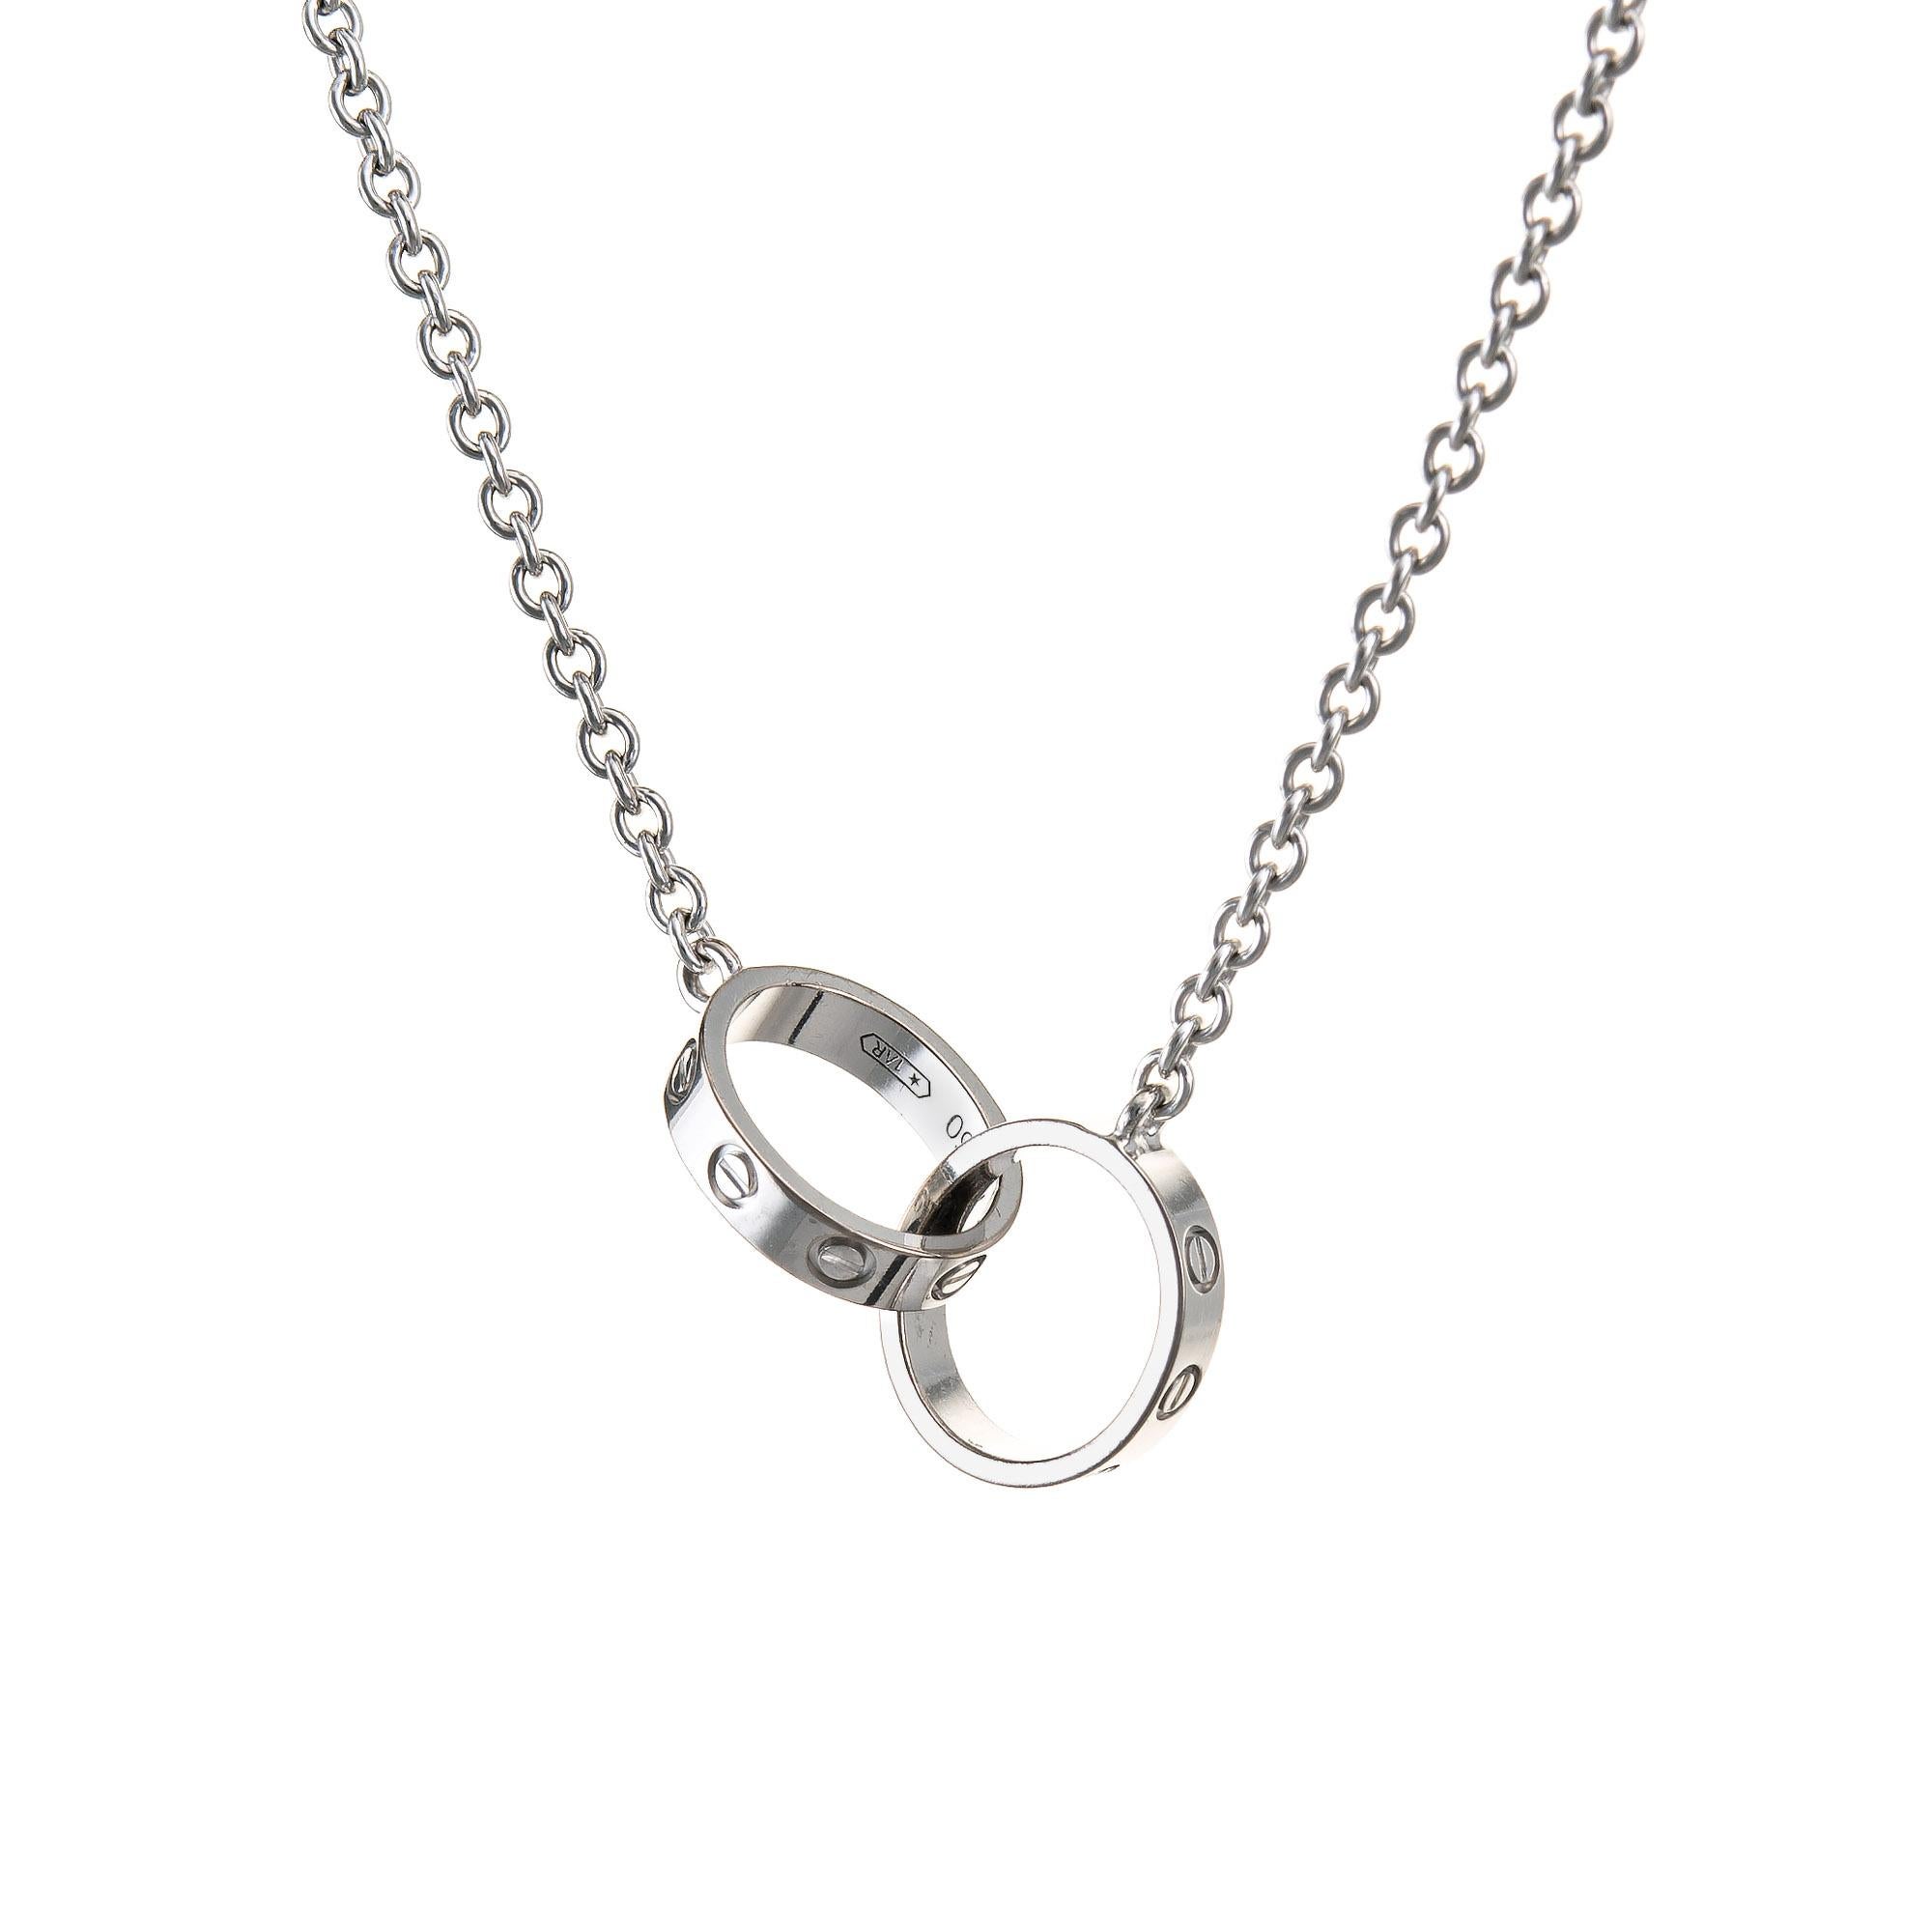 Pre-owned Cartier Love necklace crafted in 18k white gold.  

The Cartier necklace features two interlocking love links. The necklace is great worn alone or layered with your fine jewelry from any era. 

The ring is in very good condition and was